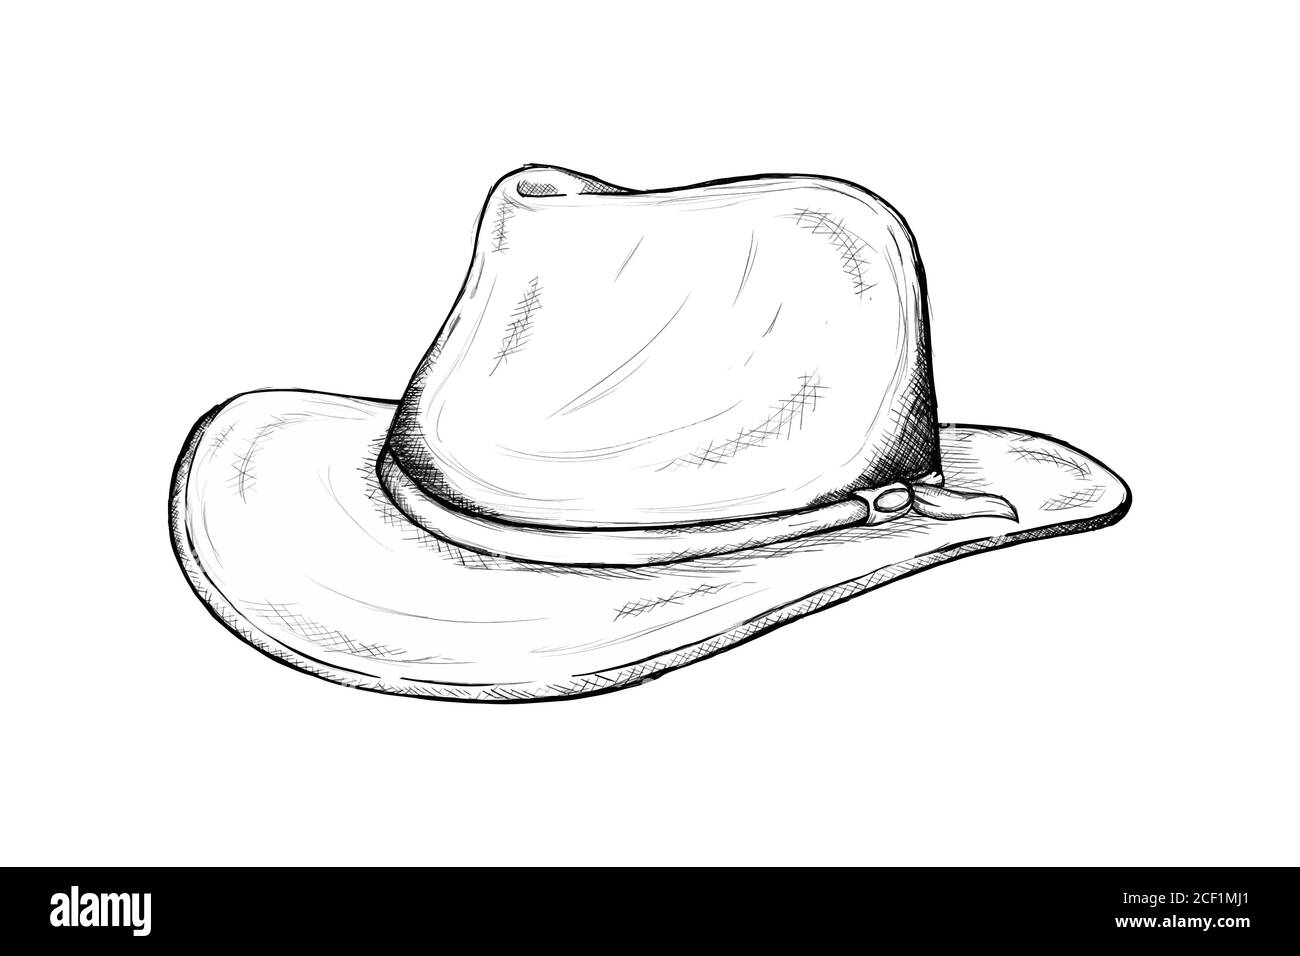 cowboy hat sketch for wild west icon sketch hand drawn illustration isolated with white background Stock Vector